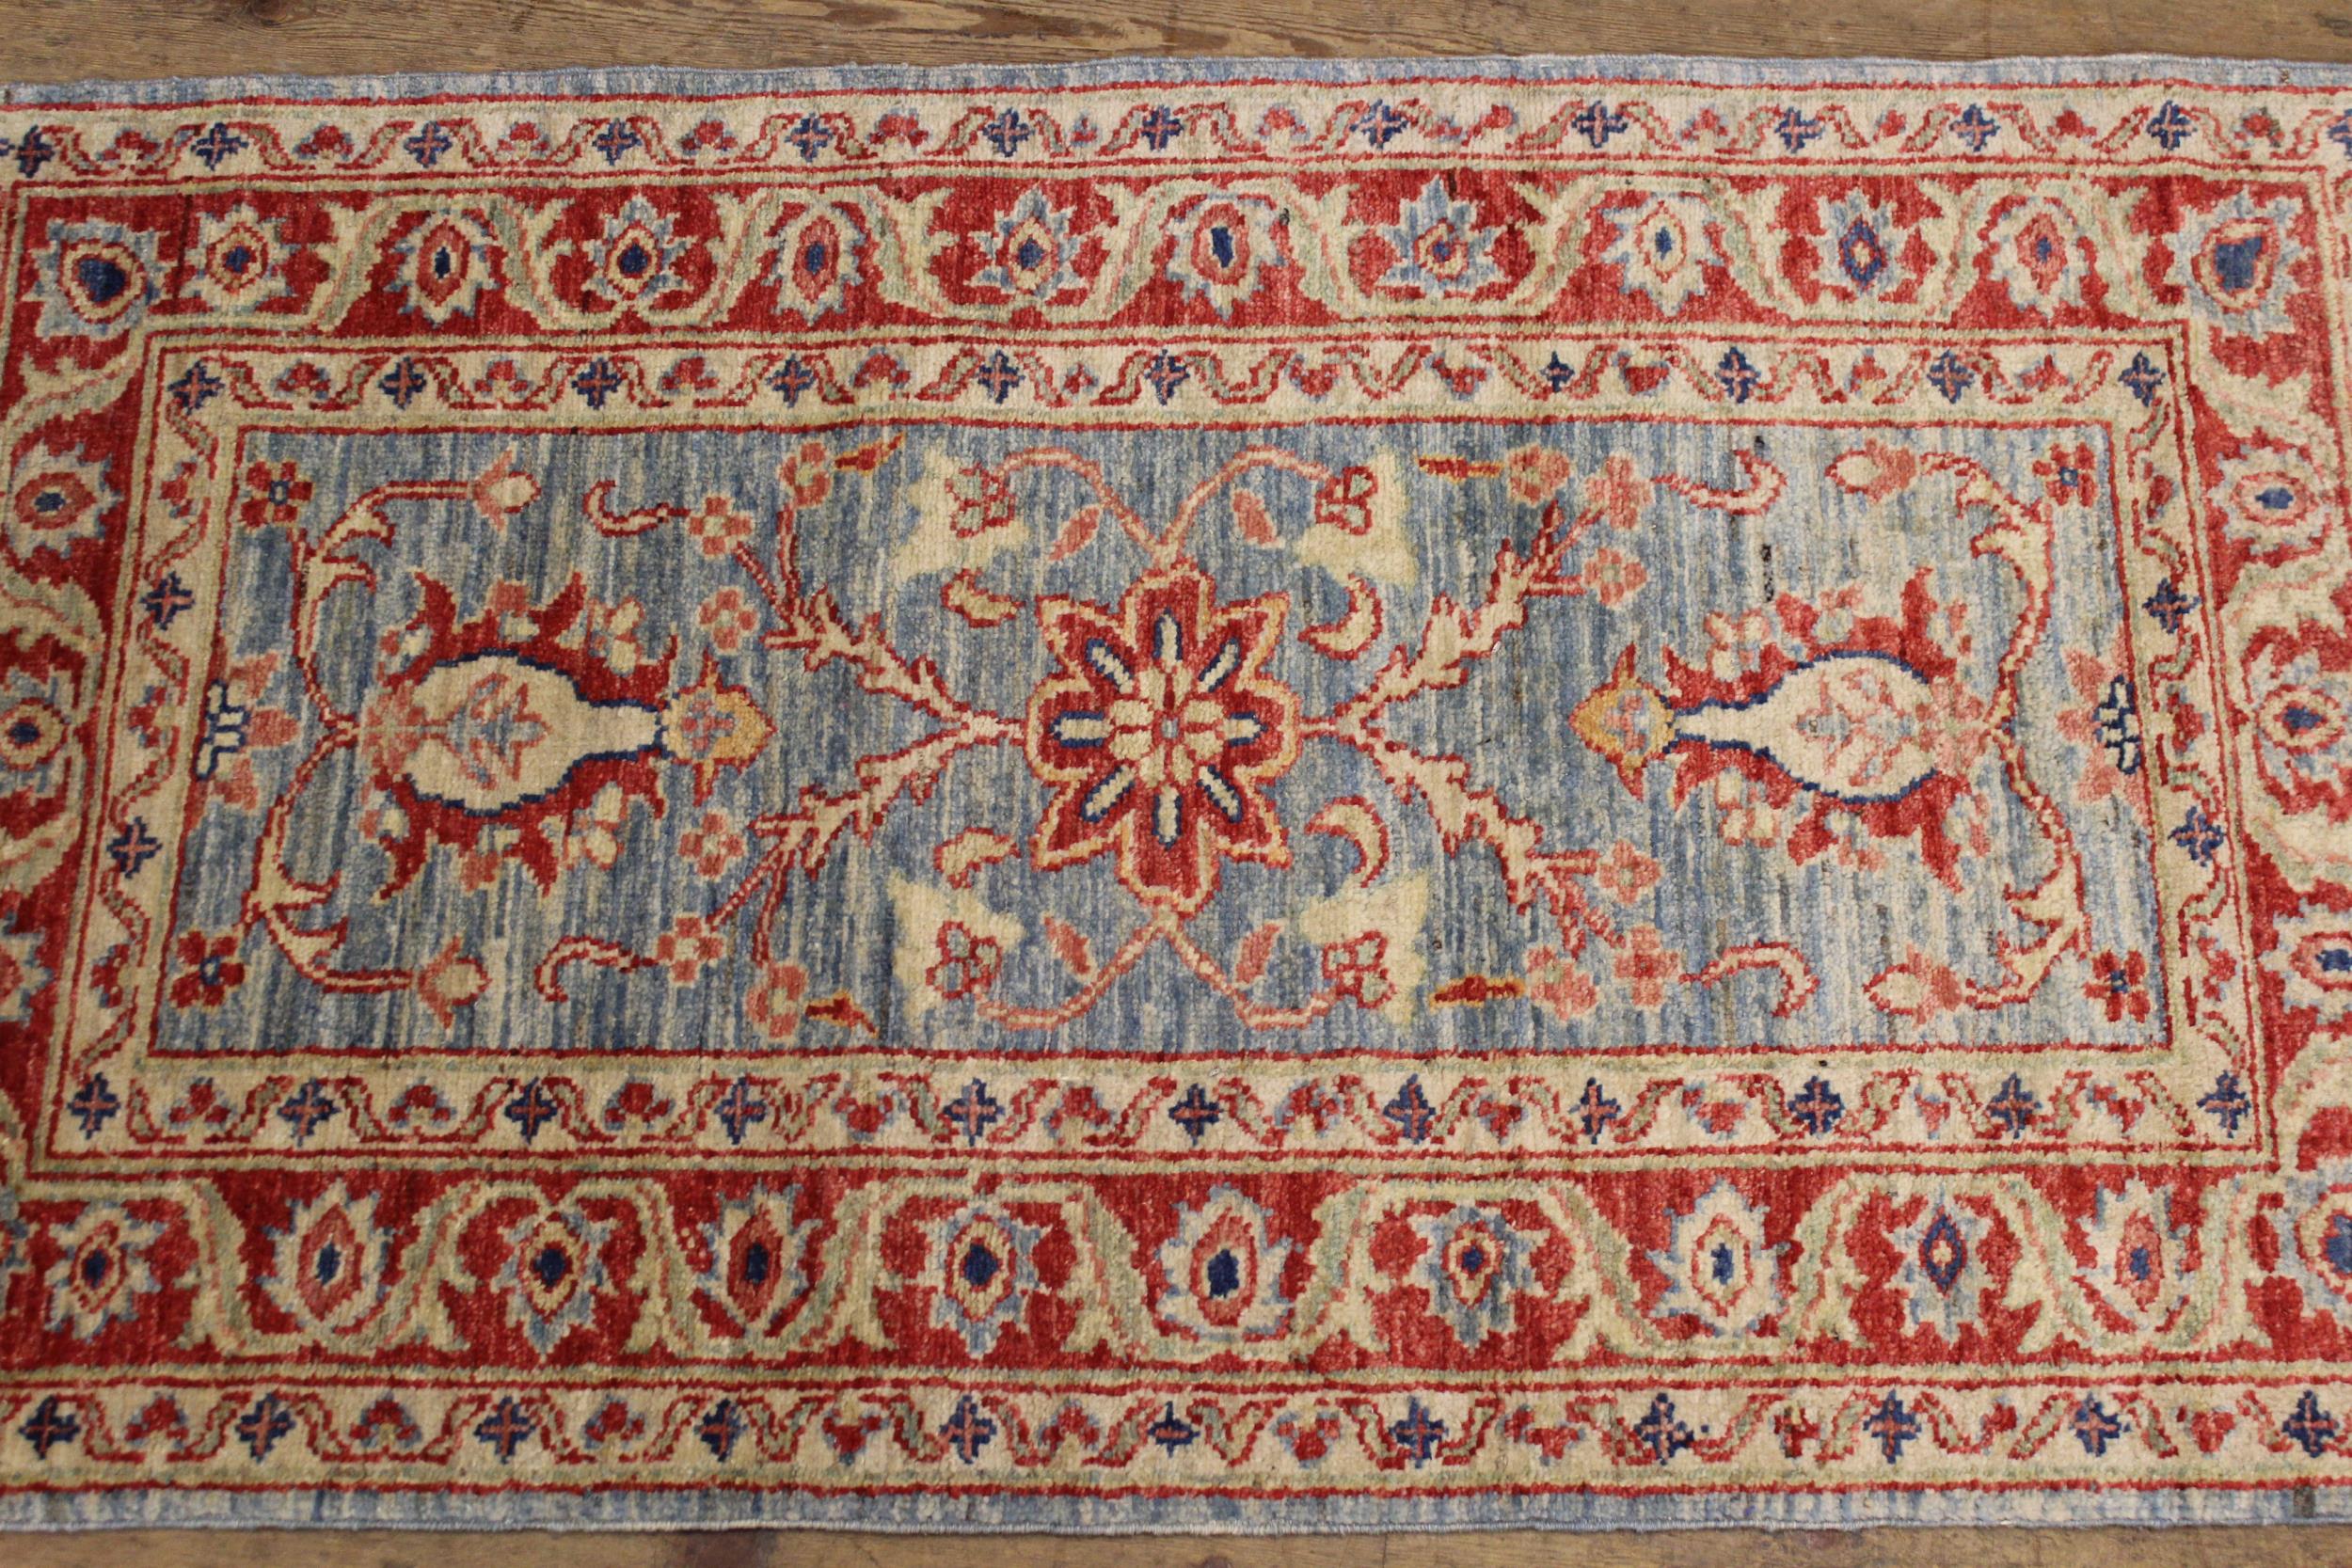 Pair of Indo / Persian rugs with floral design on blue ground, each 117 x 70cm